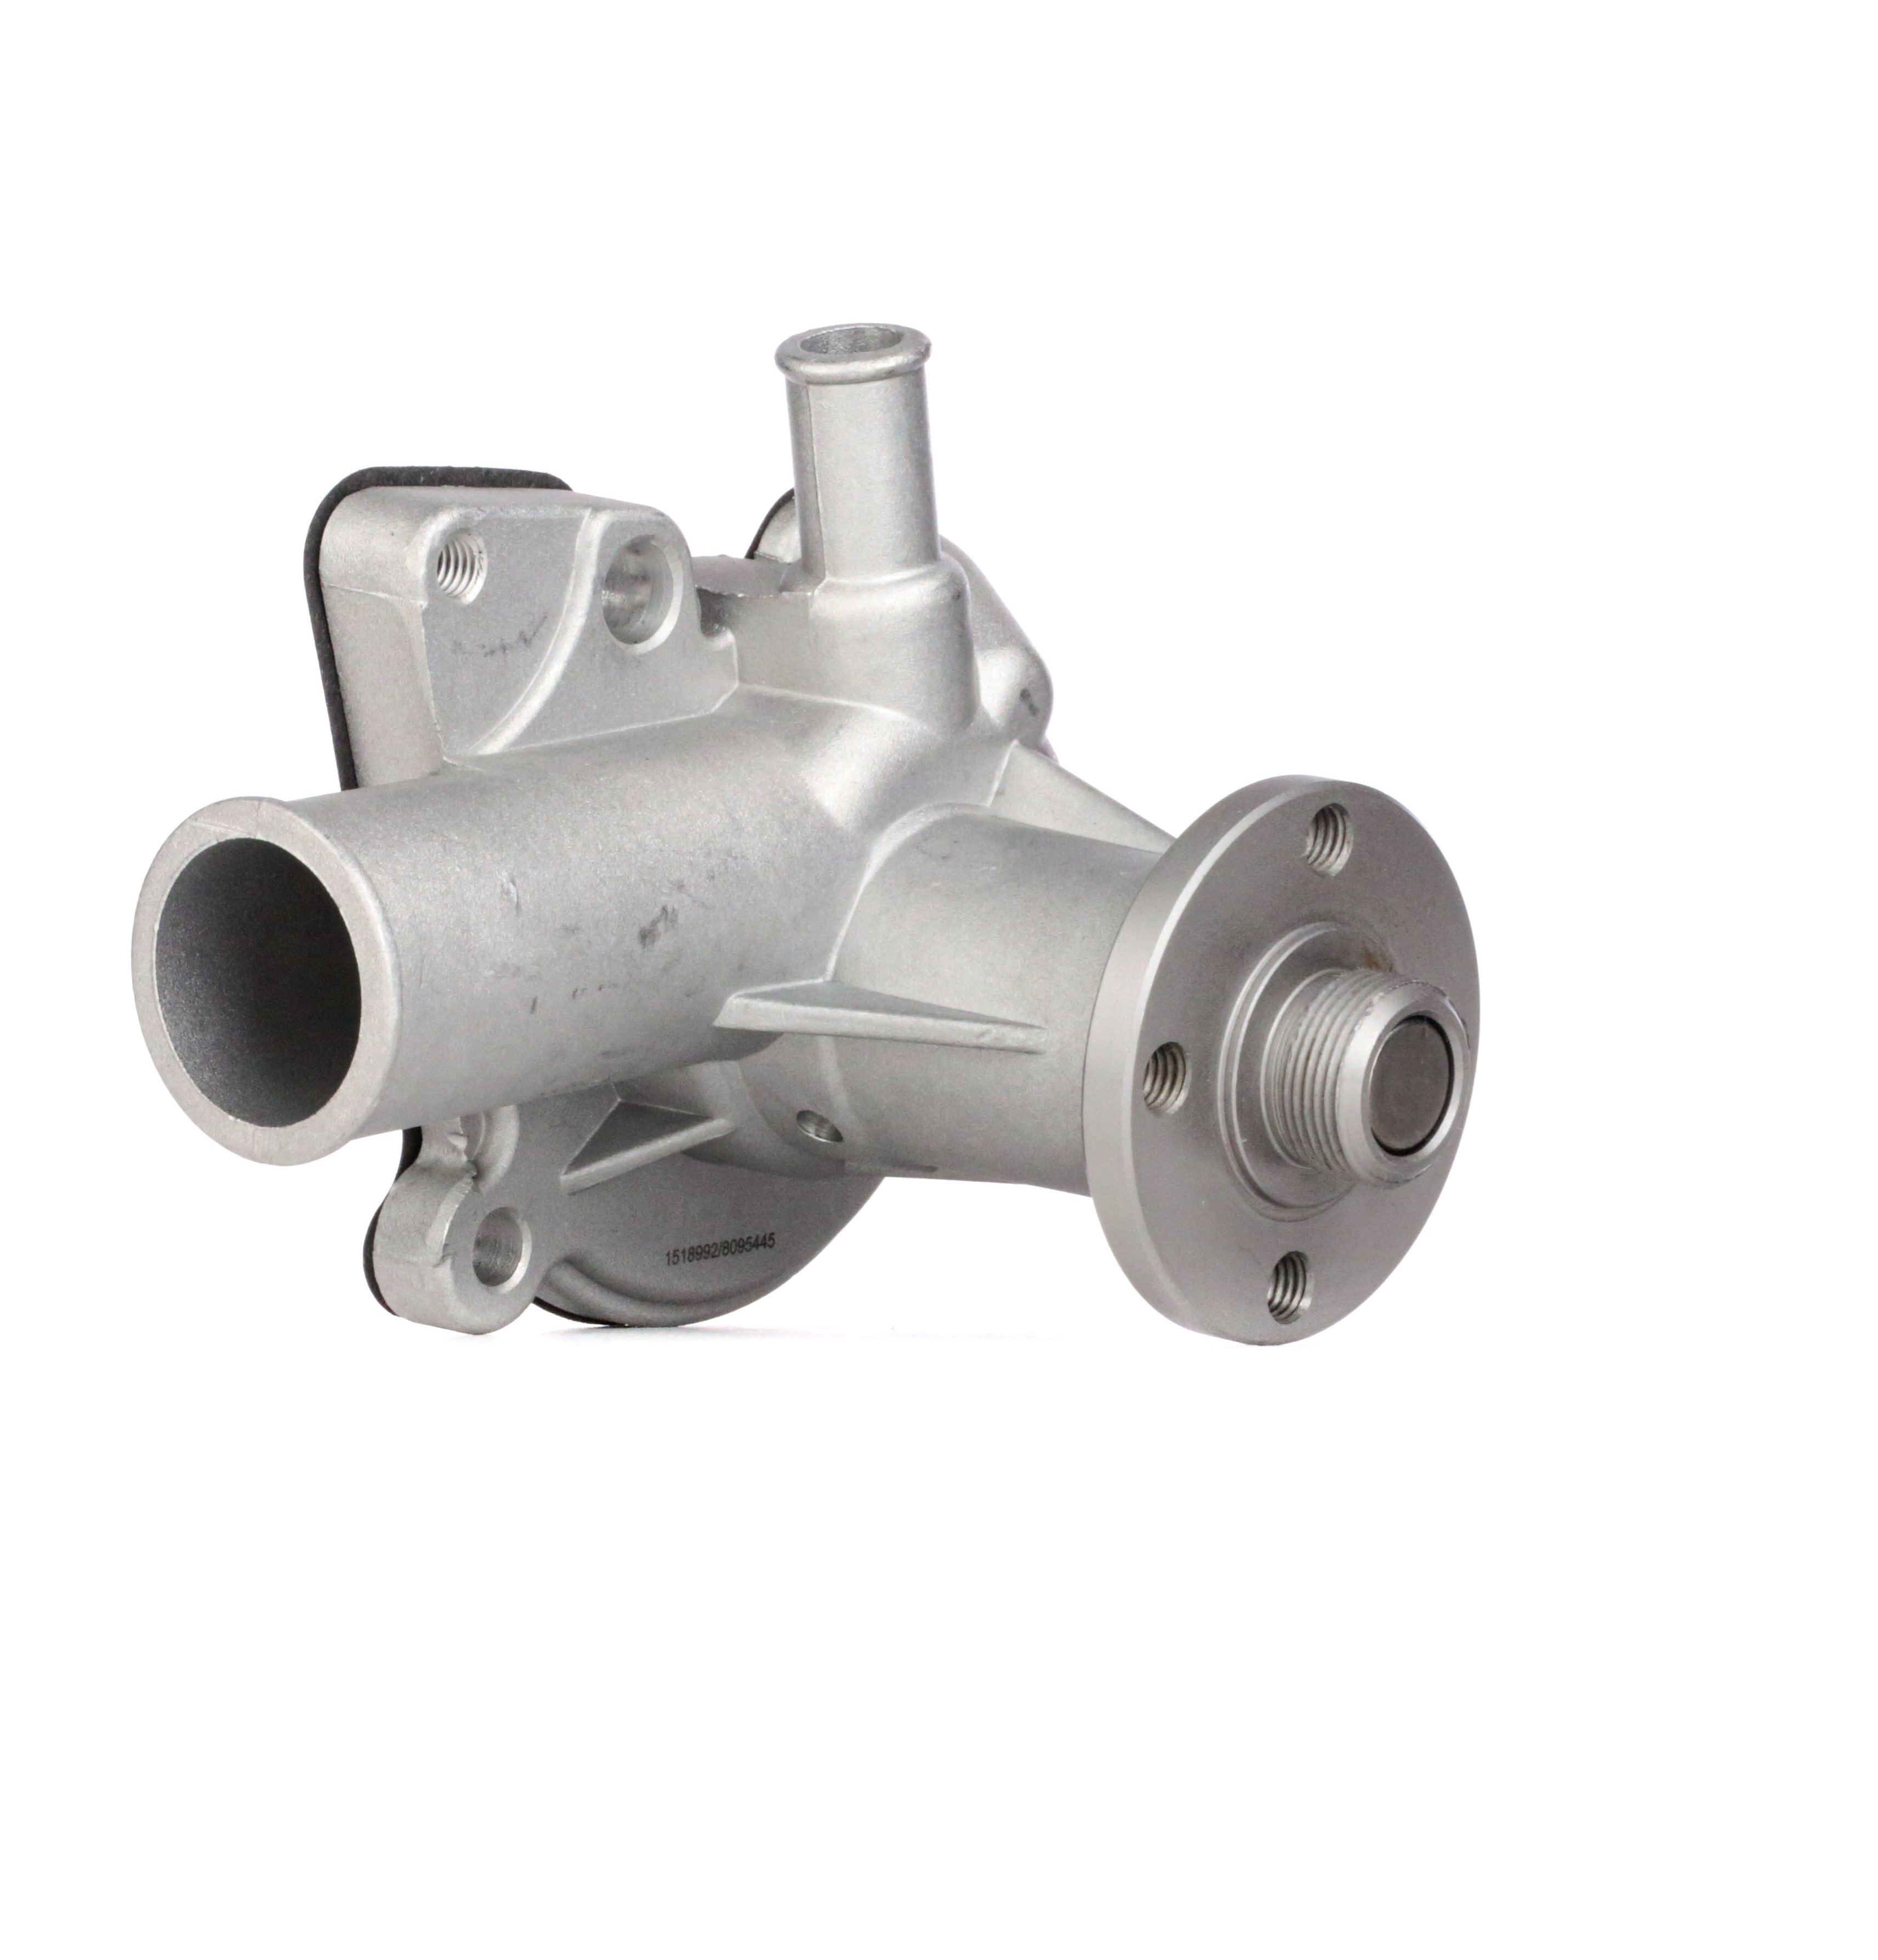 Image of RIDEX Water pump FORD 1260W0102 1126032,1126033,1233216 Engine water pump,Water pump for engine 5004995,5004997,5006043,5006046,5009286,5009287,EPW41